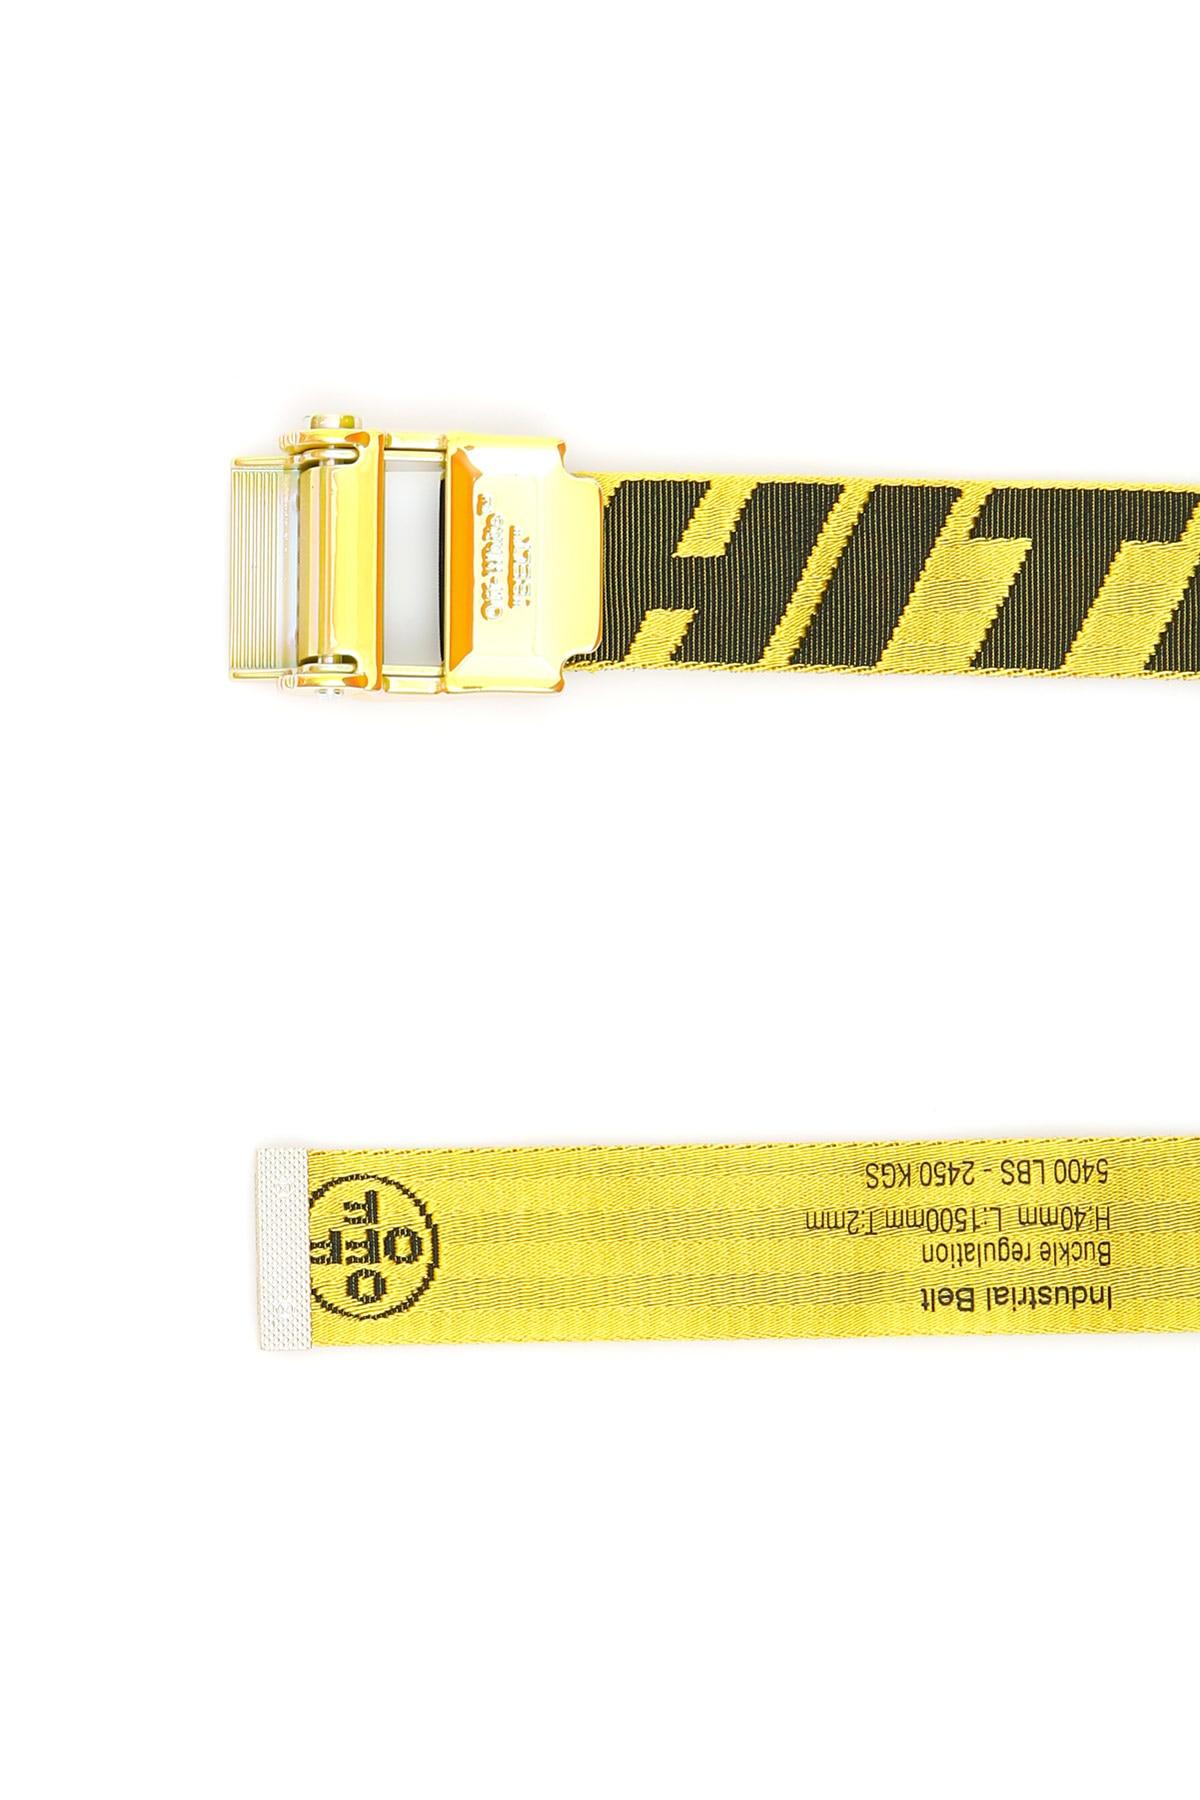 to uger dollar anekdote Off-White c/o Virgil Abloh Industrial 2.0 Logo Jacquard Mini Belt in  Yellow,Black (Yellow) for Men - Save 65% - Lyst